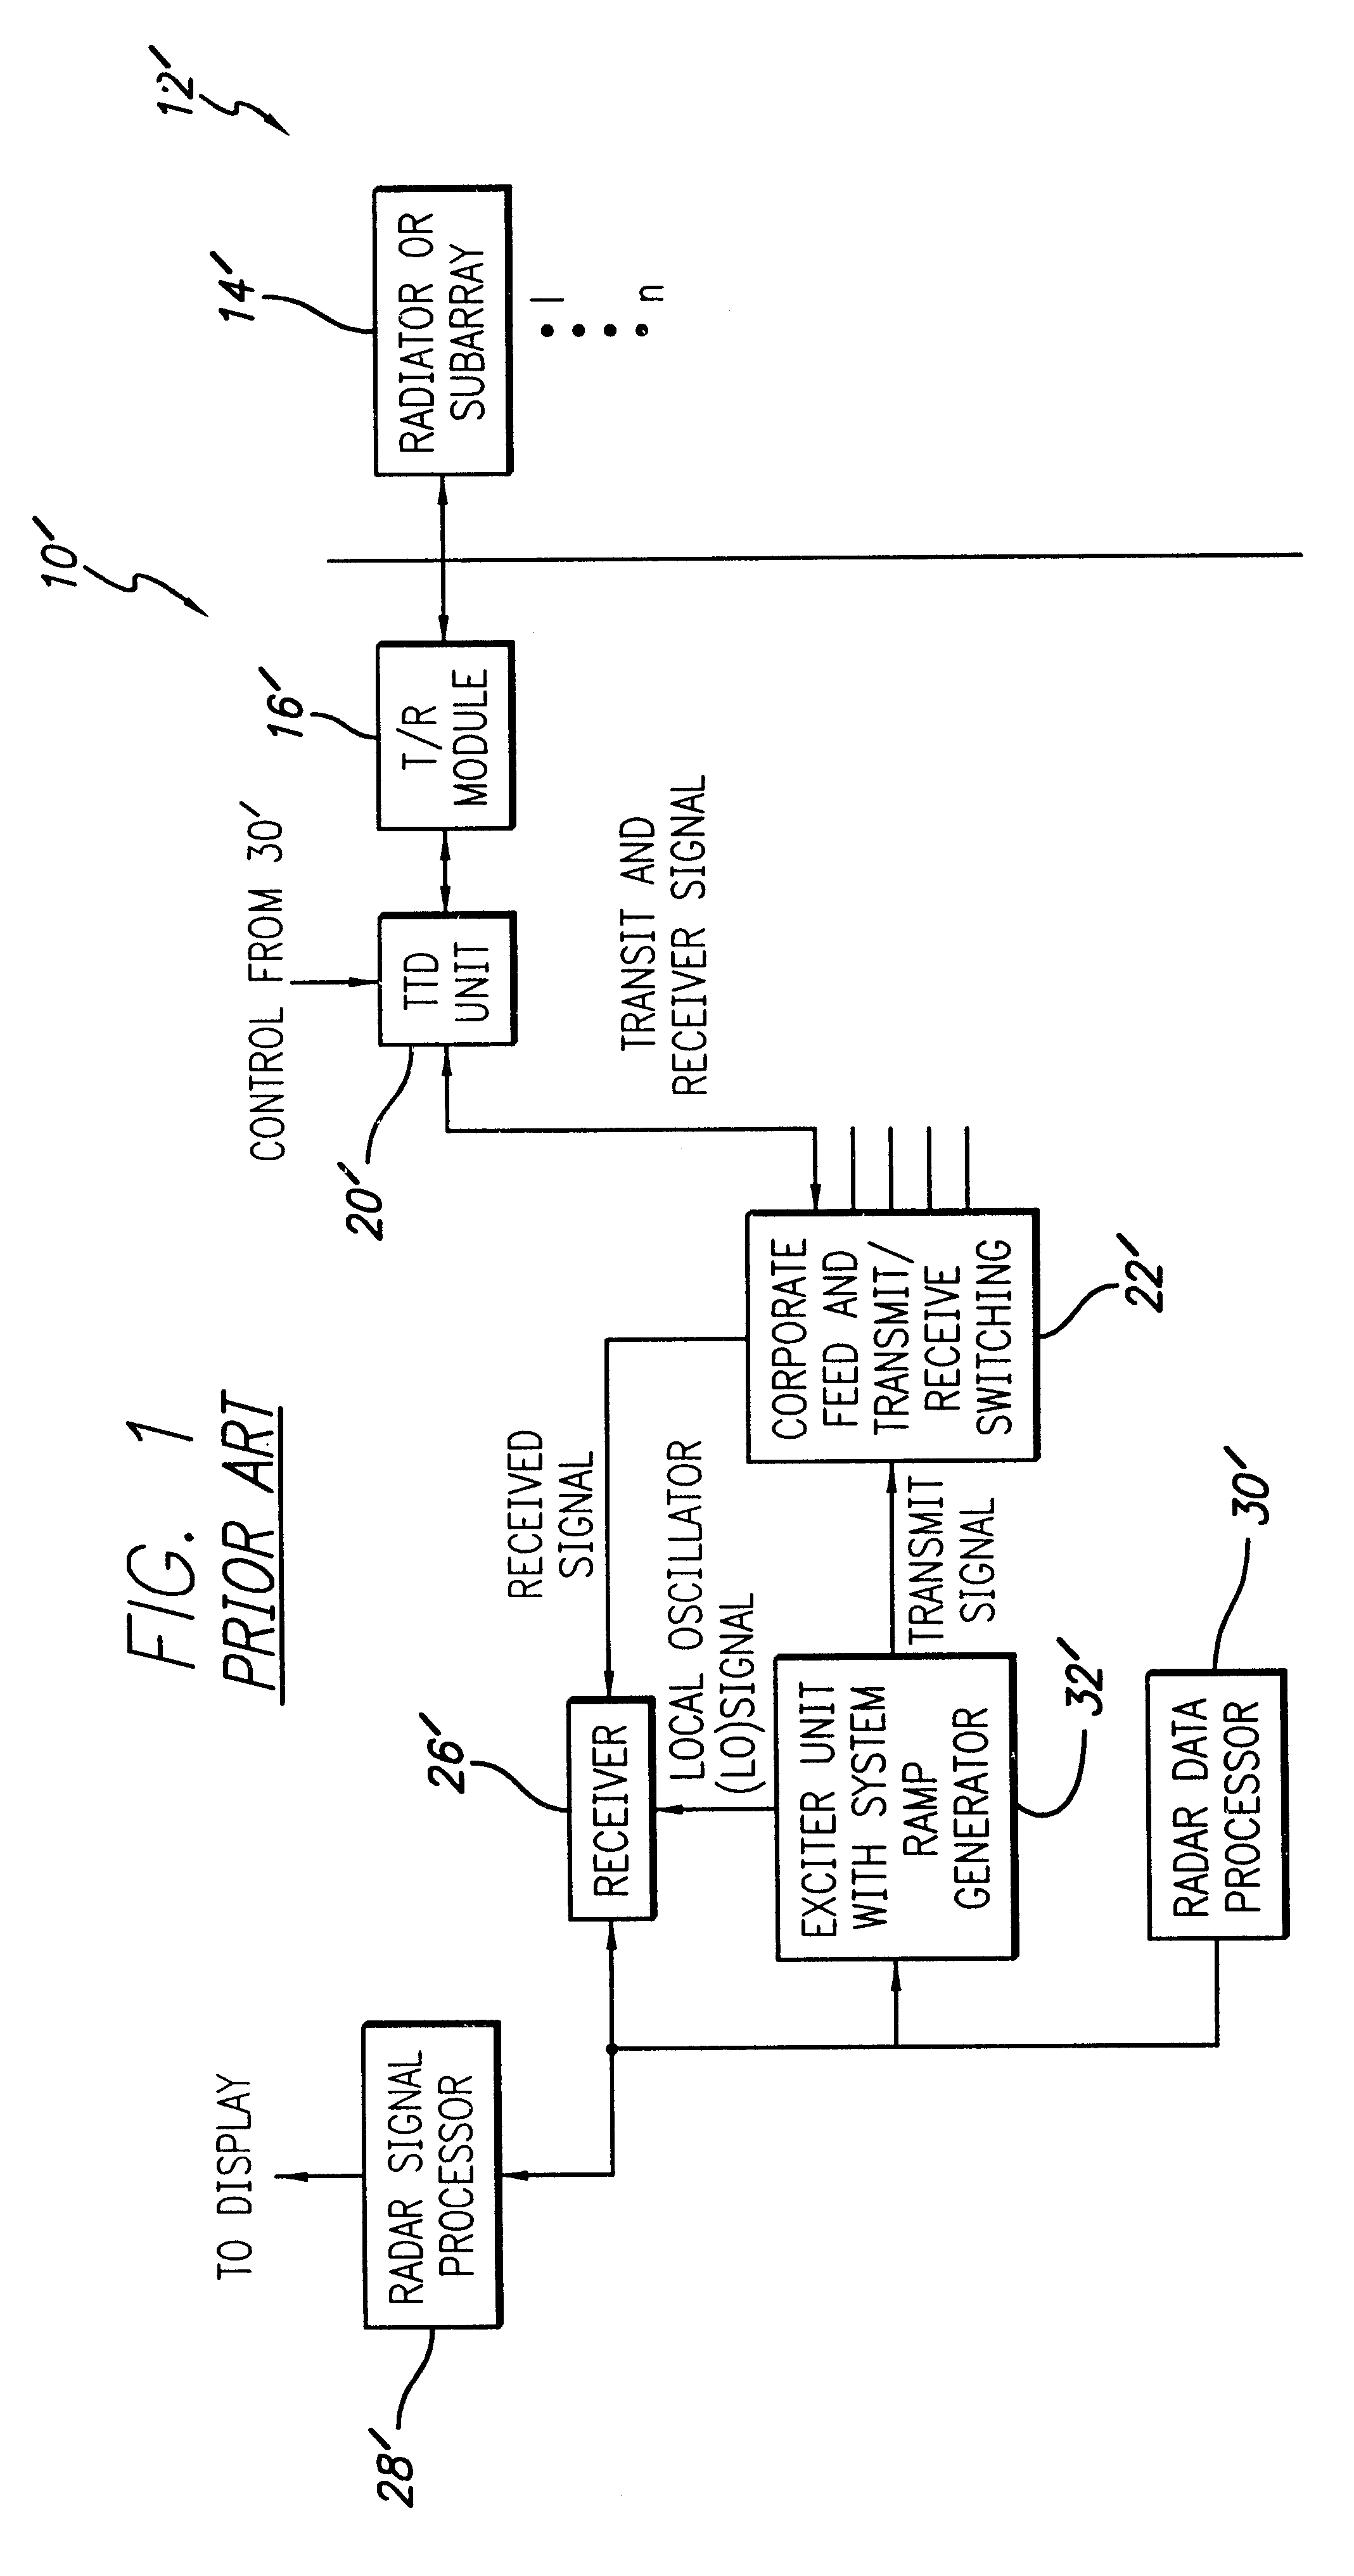 Phased array antenna system with virtual time delay beam steering